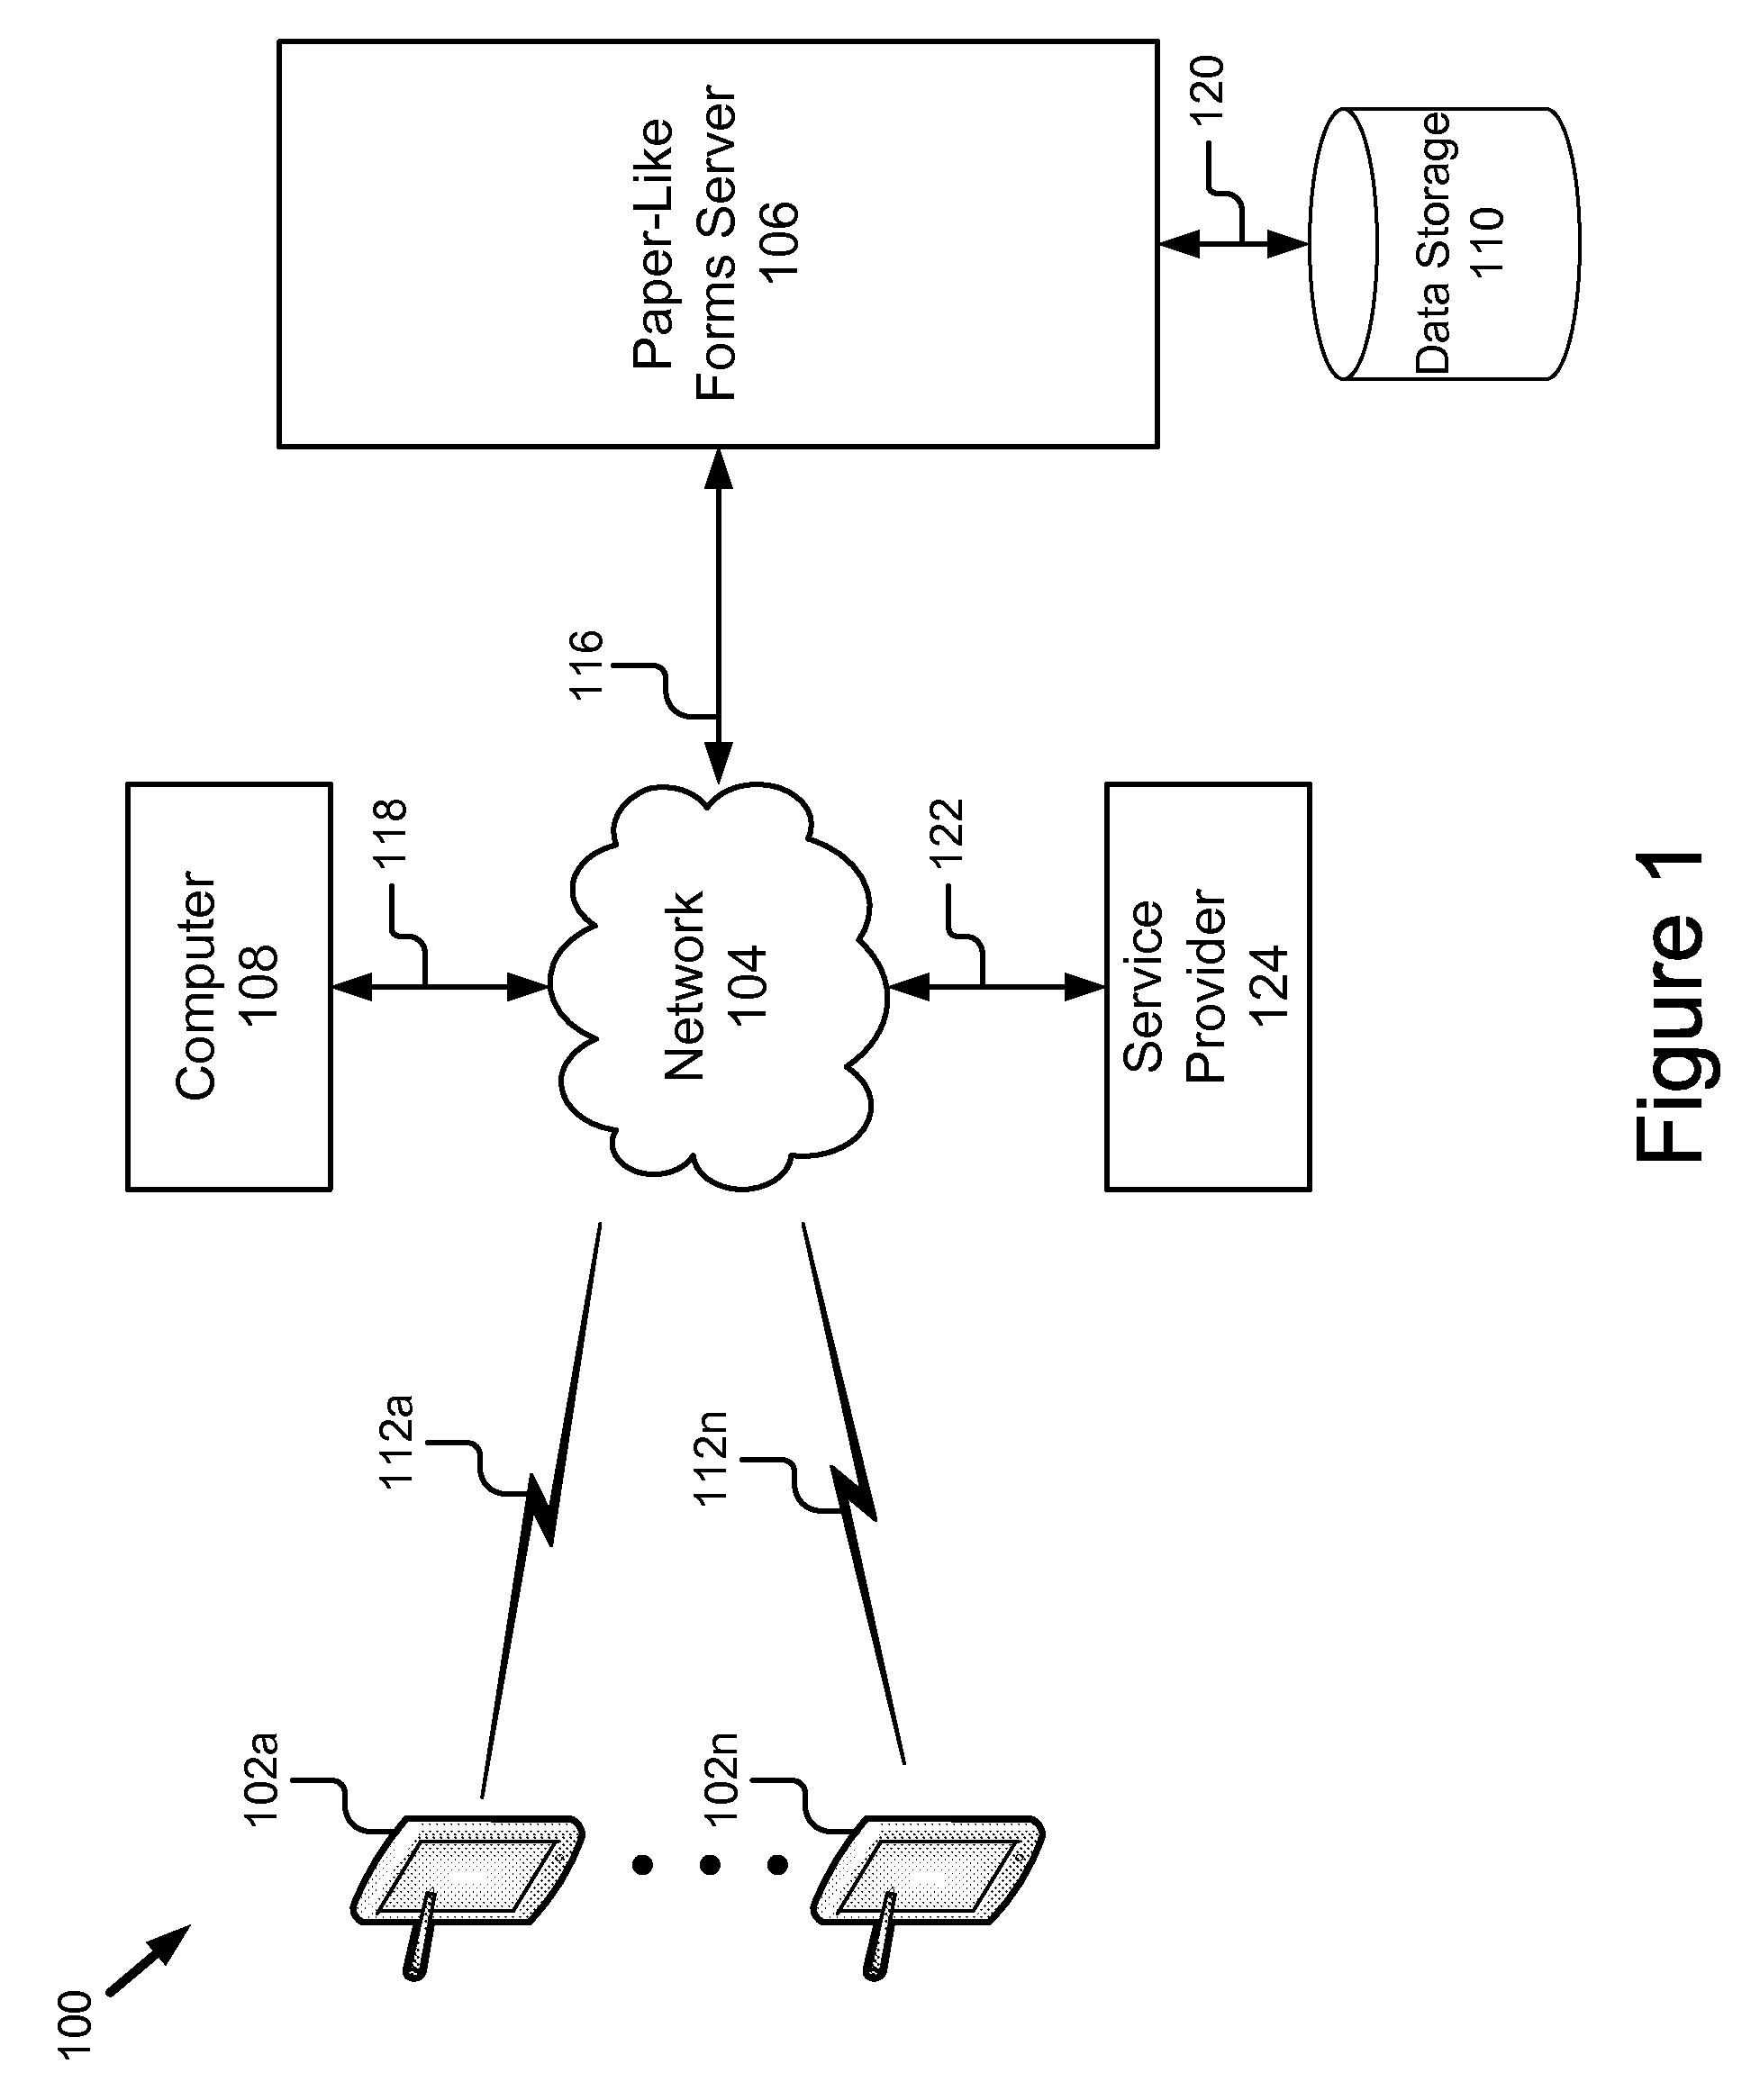 Paper-like forms processing system & method